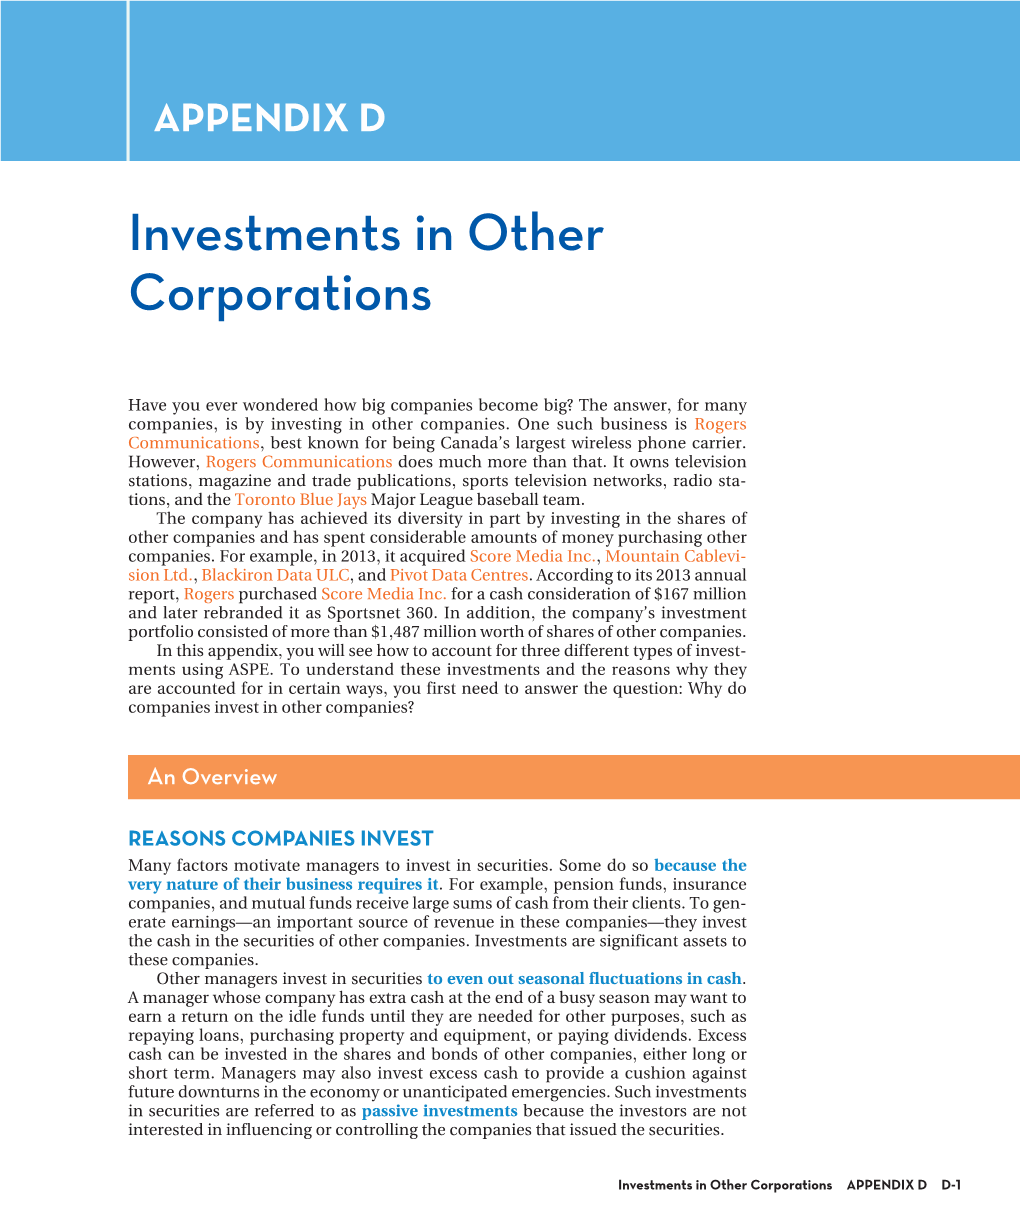 Investments in Other Corporations